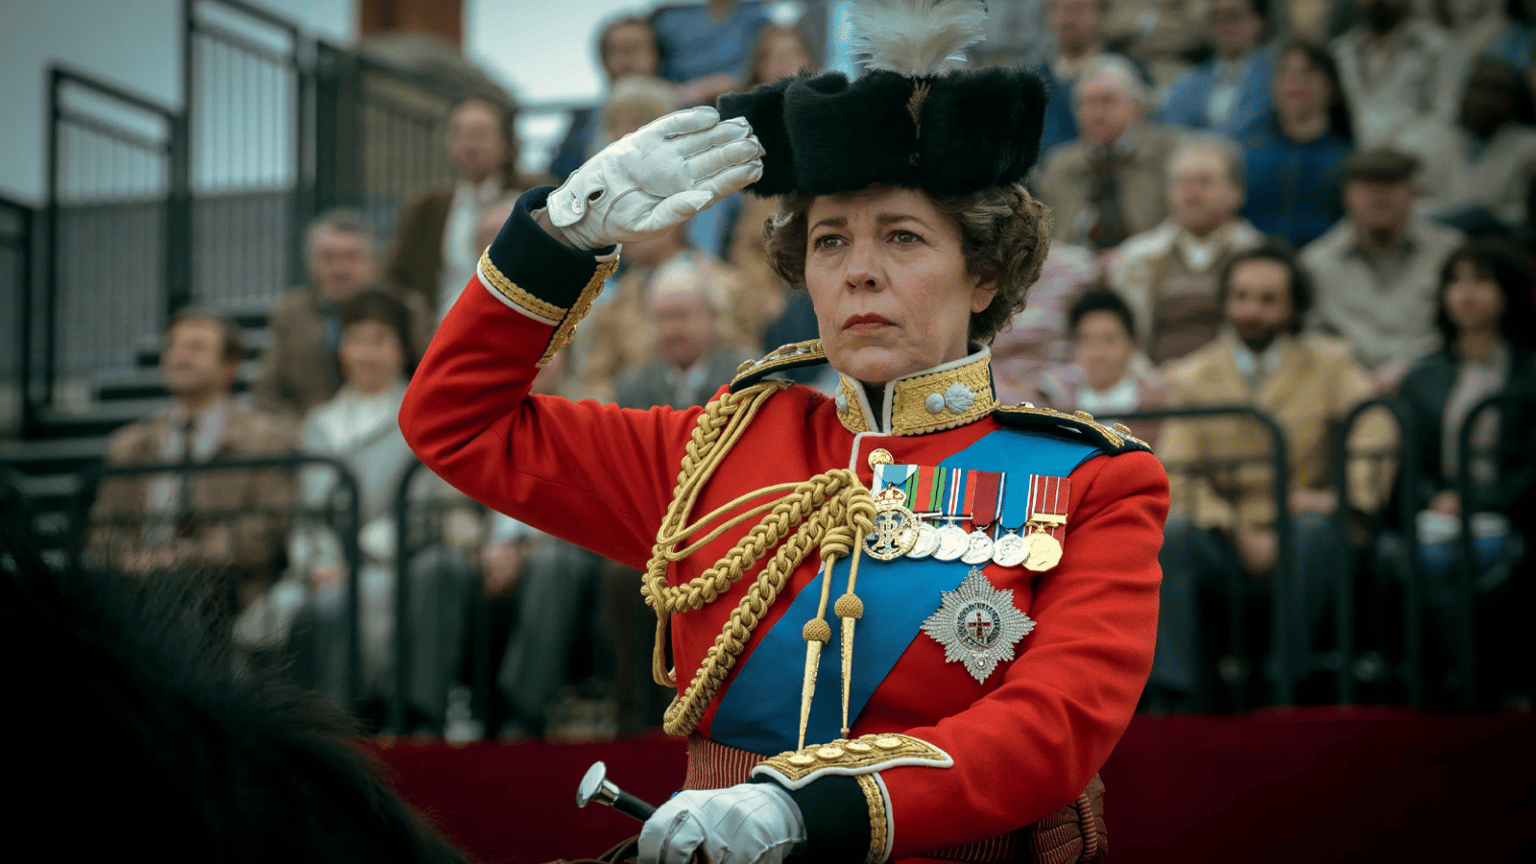 Emmys 2021 The Crown wins 11 Awards! Gravity Media